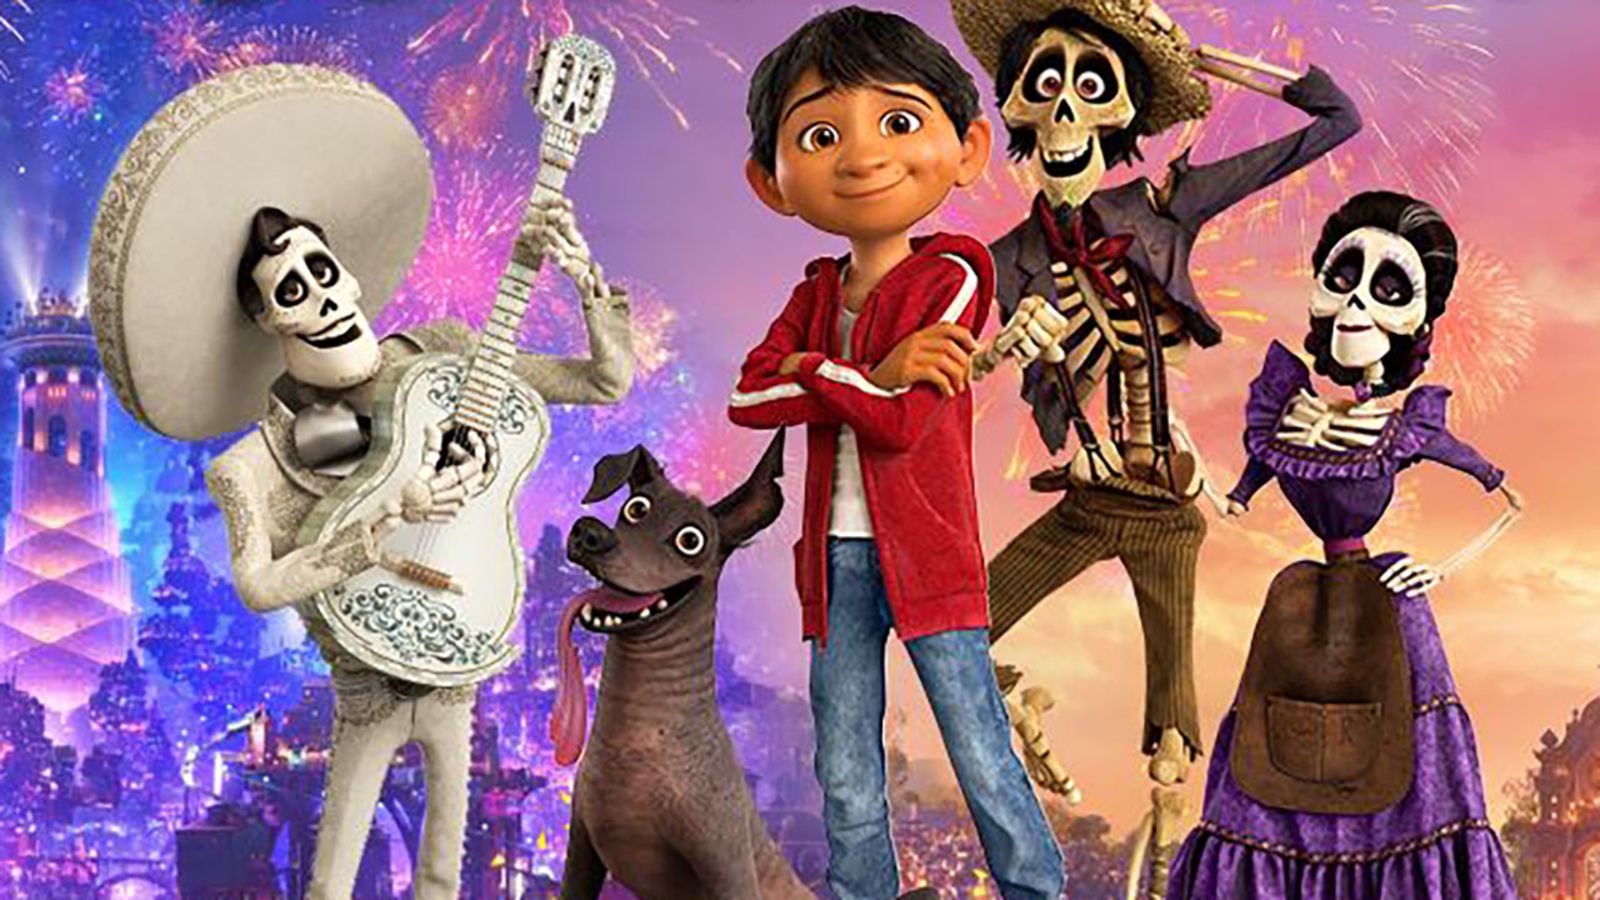 Danielle Feinberg tells us how they achieved that phenomenal lighting in ' Coco' Los Angeles